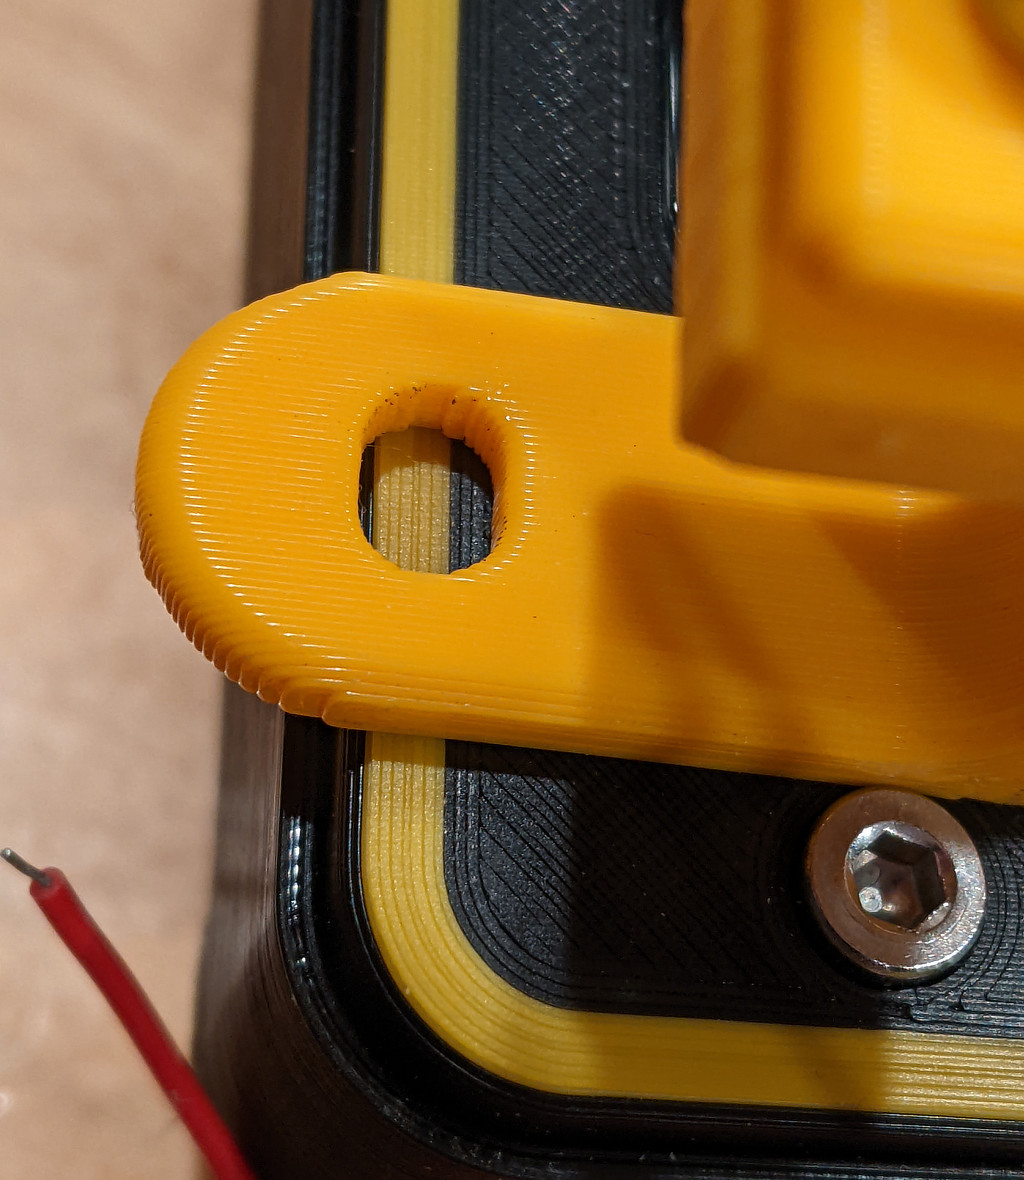 Black box with a small yellow inlayed border, compared to another part printed entirely with the same filament. The border's color is less intense, and darker